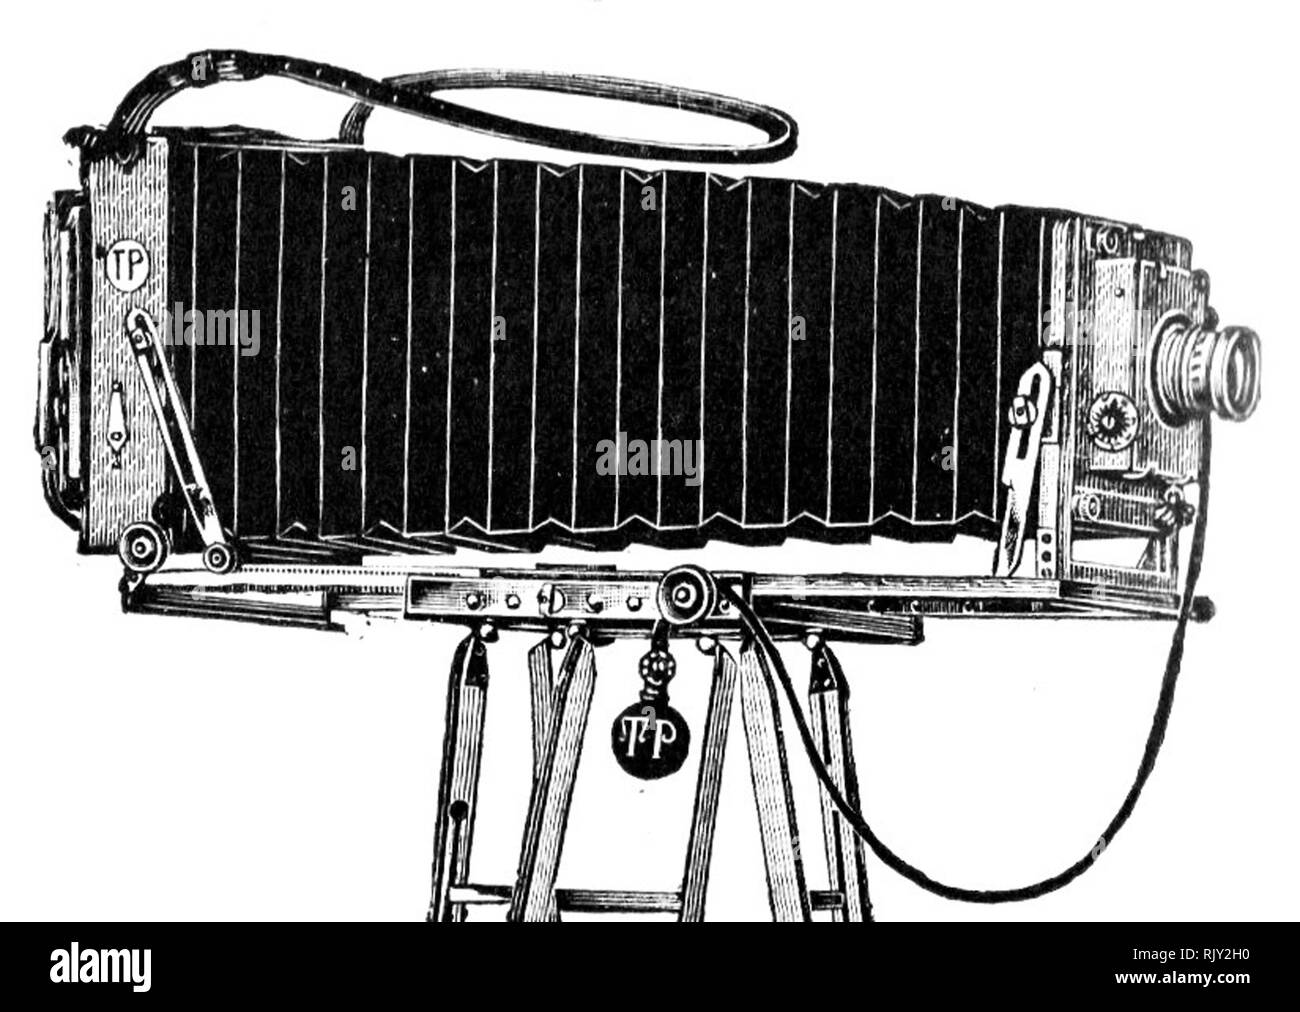 Vintage old photographic plate camera - this was made by Thornton Pickard who were established in 1888. It is described as a Long Extension Field Camera. Stock Photo